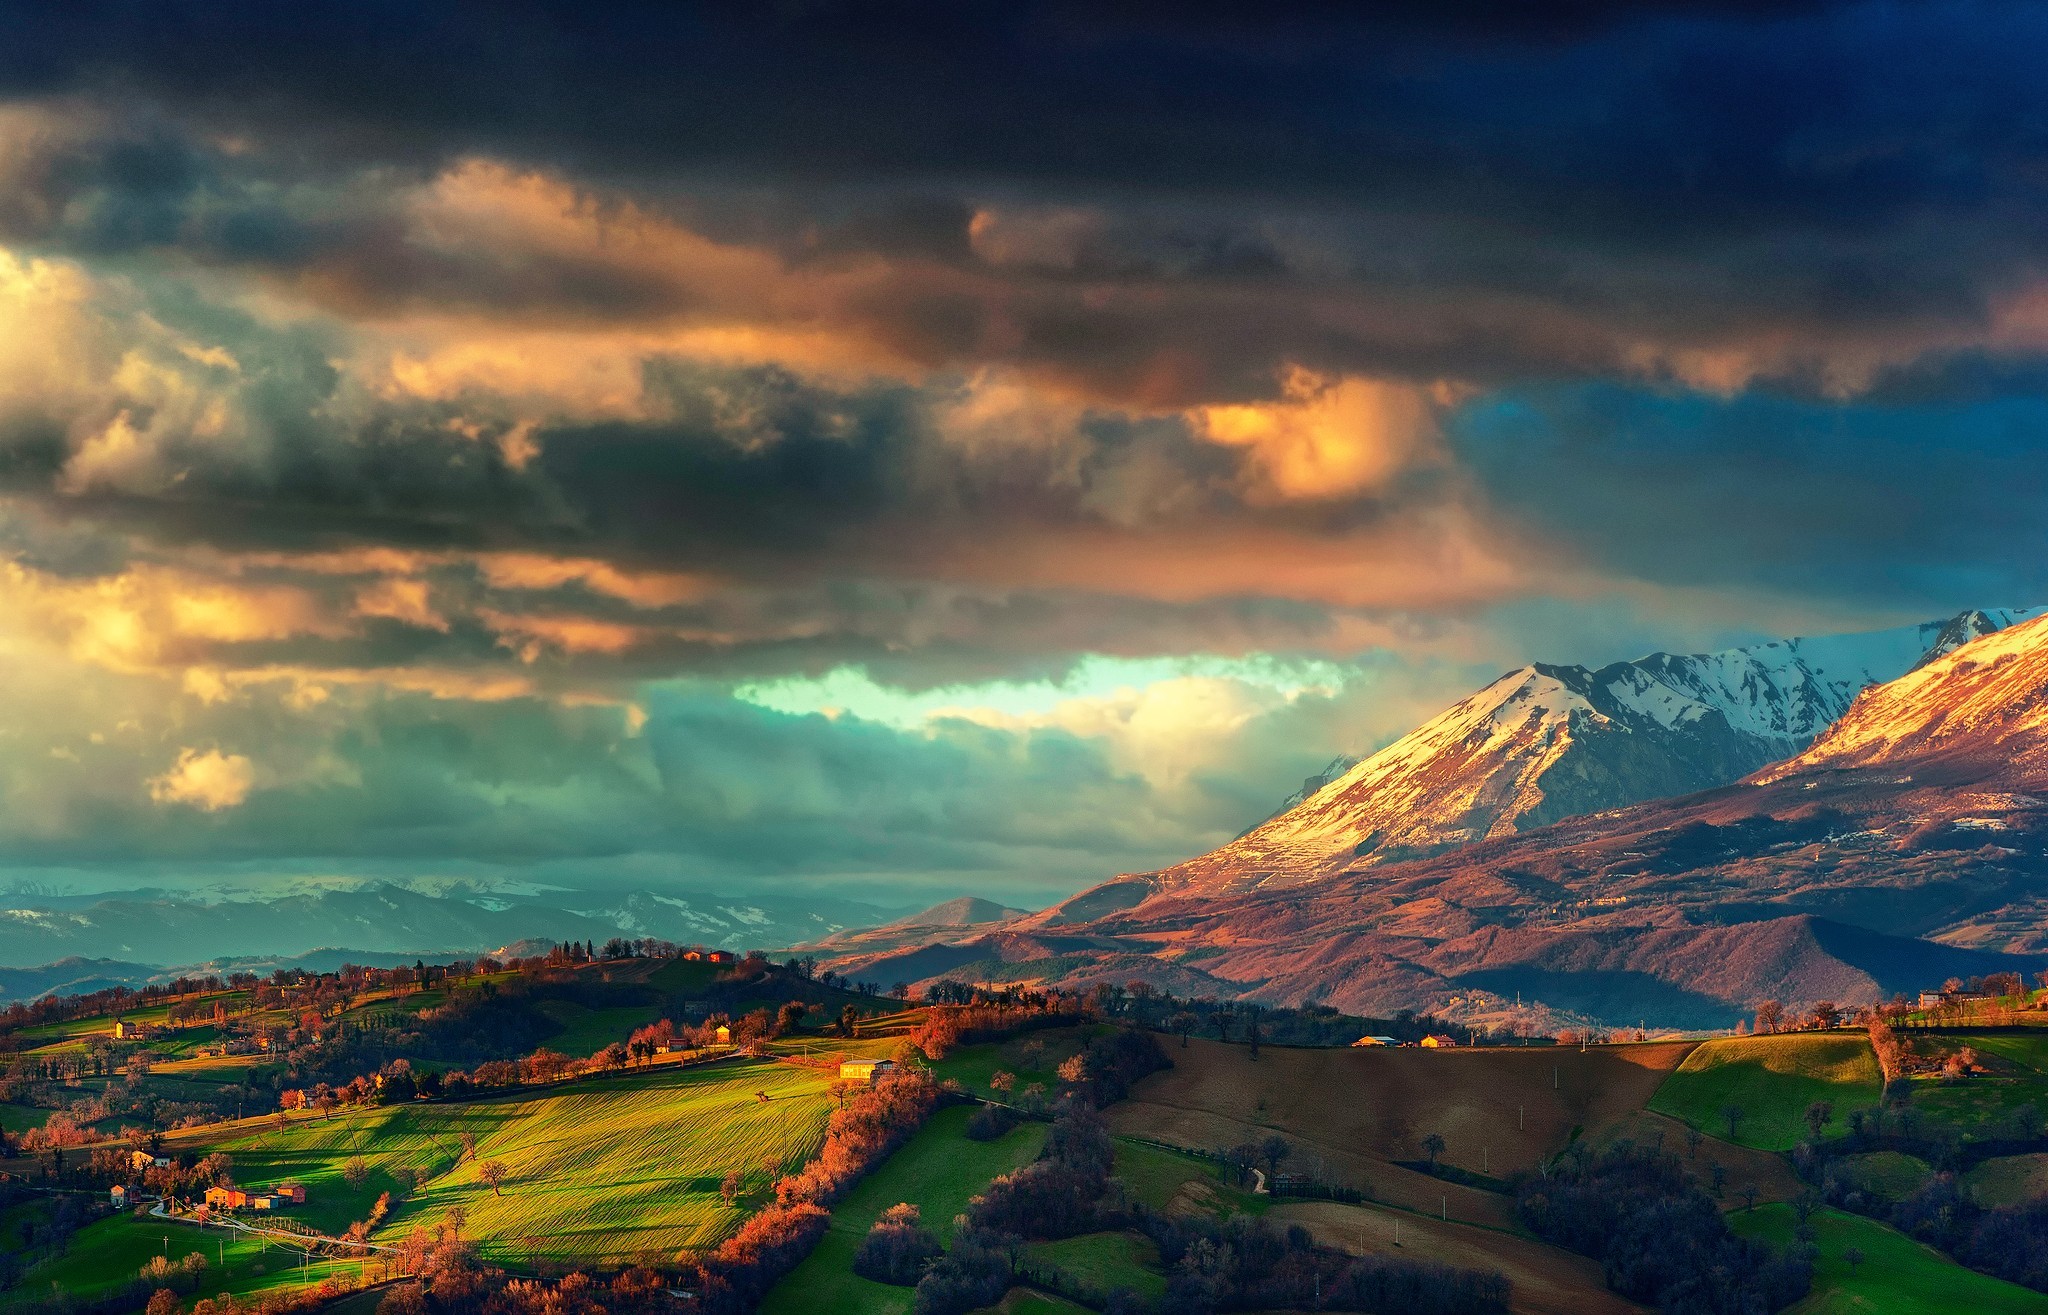 General 2048x1315 landscape Italy valley overcast fall snowy peak mountains sky clouds